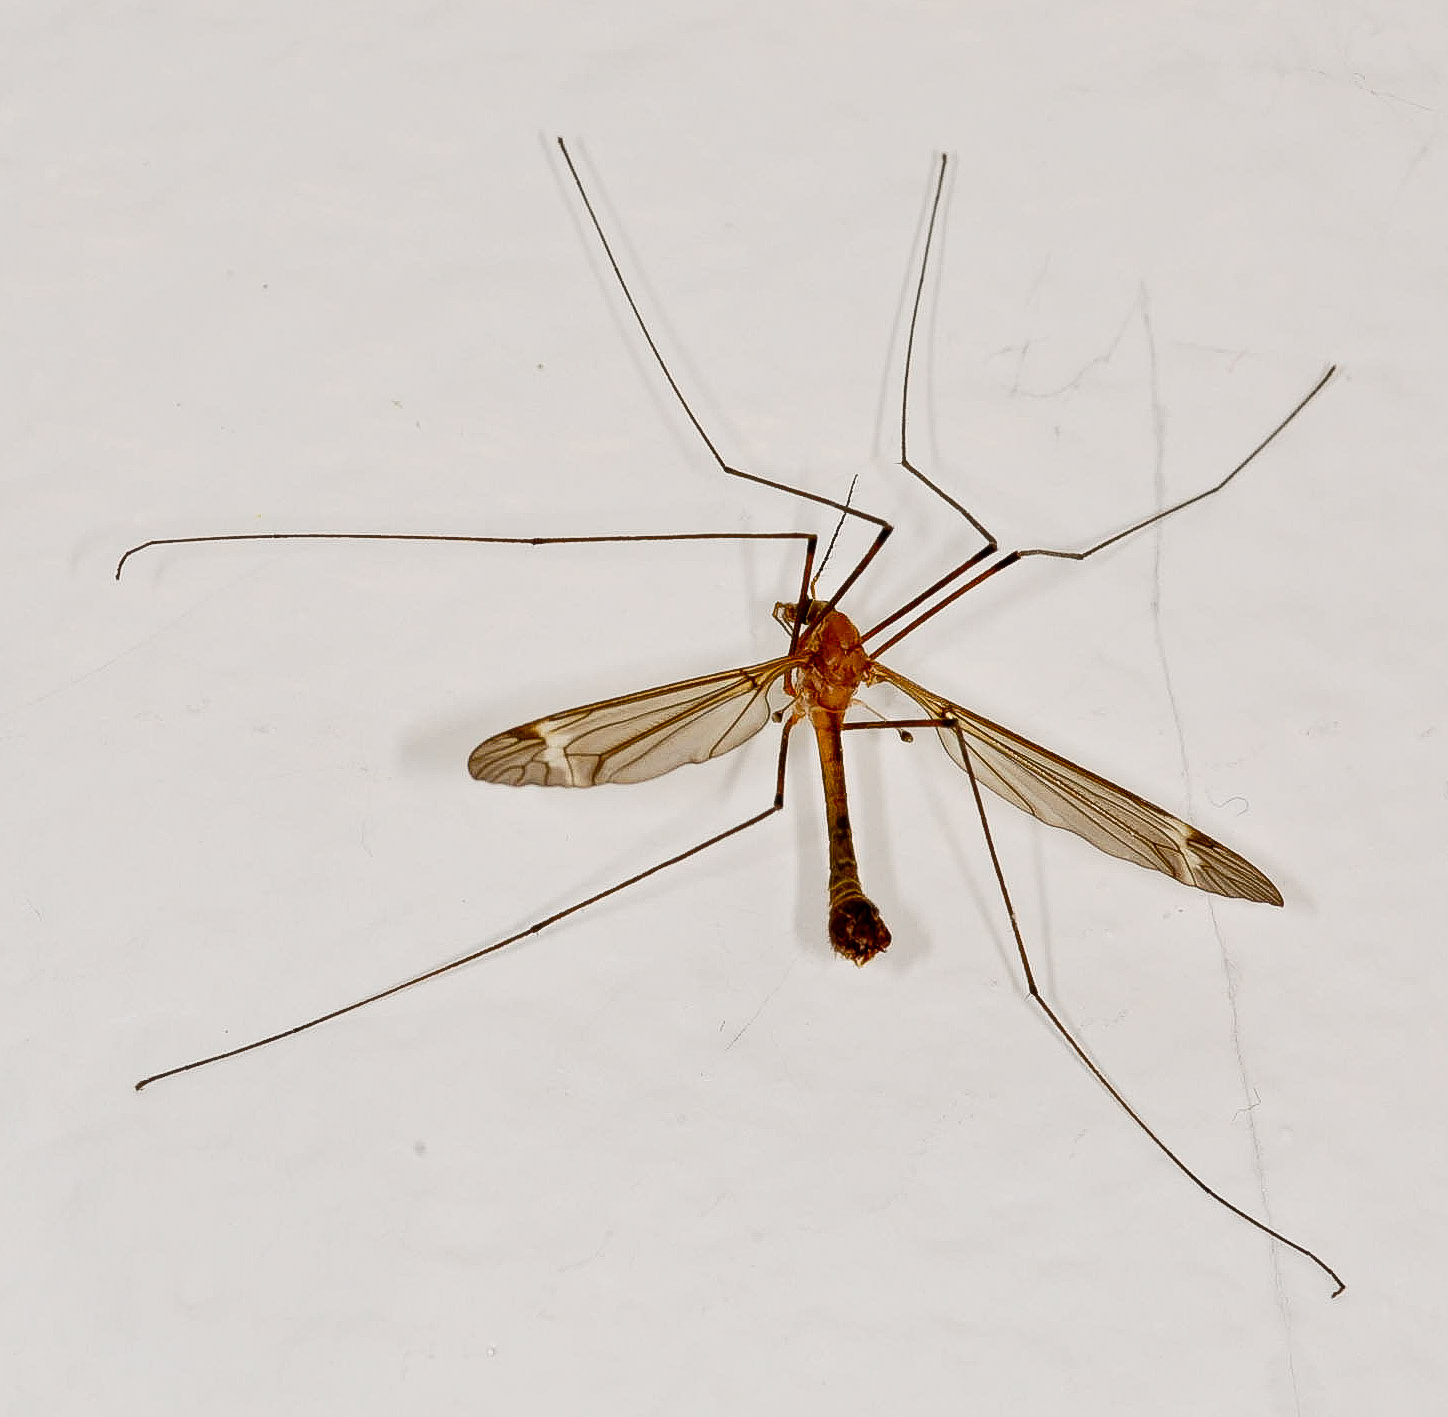 Tipulidae (Crane Flies) Crane Fly Adult from the Touchet River in Washington